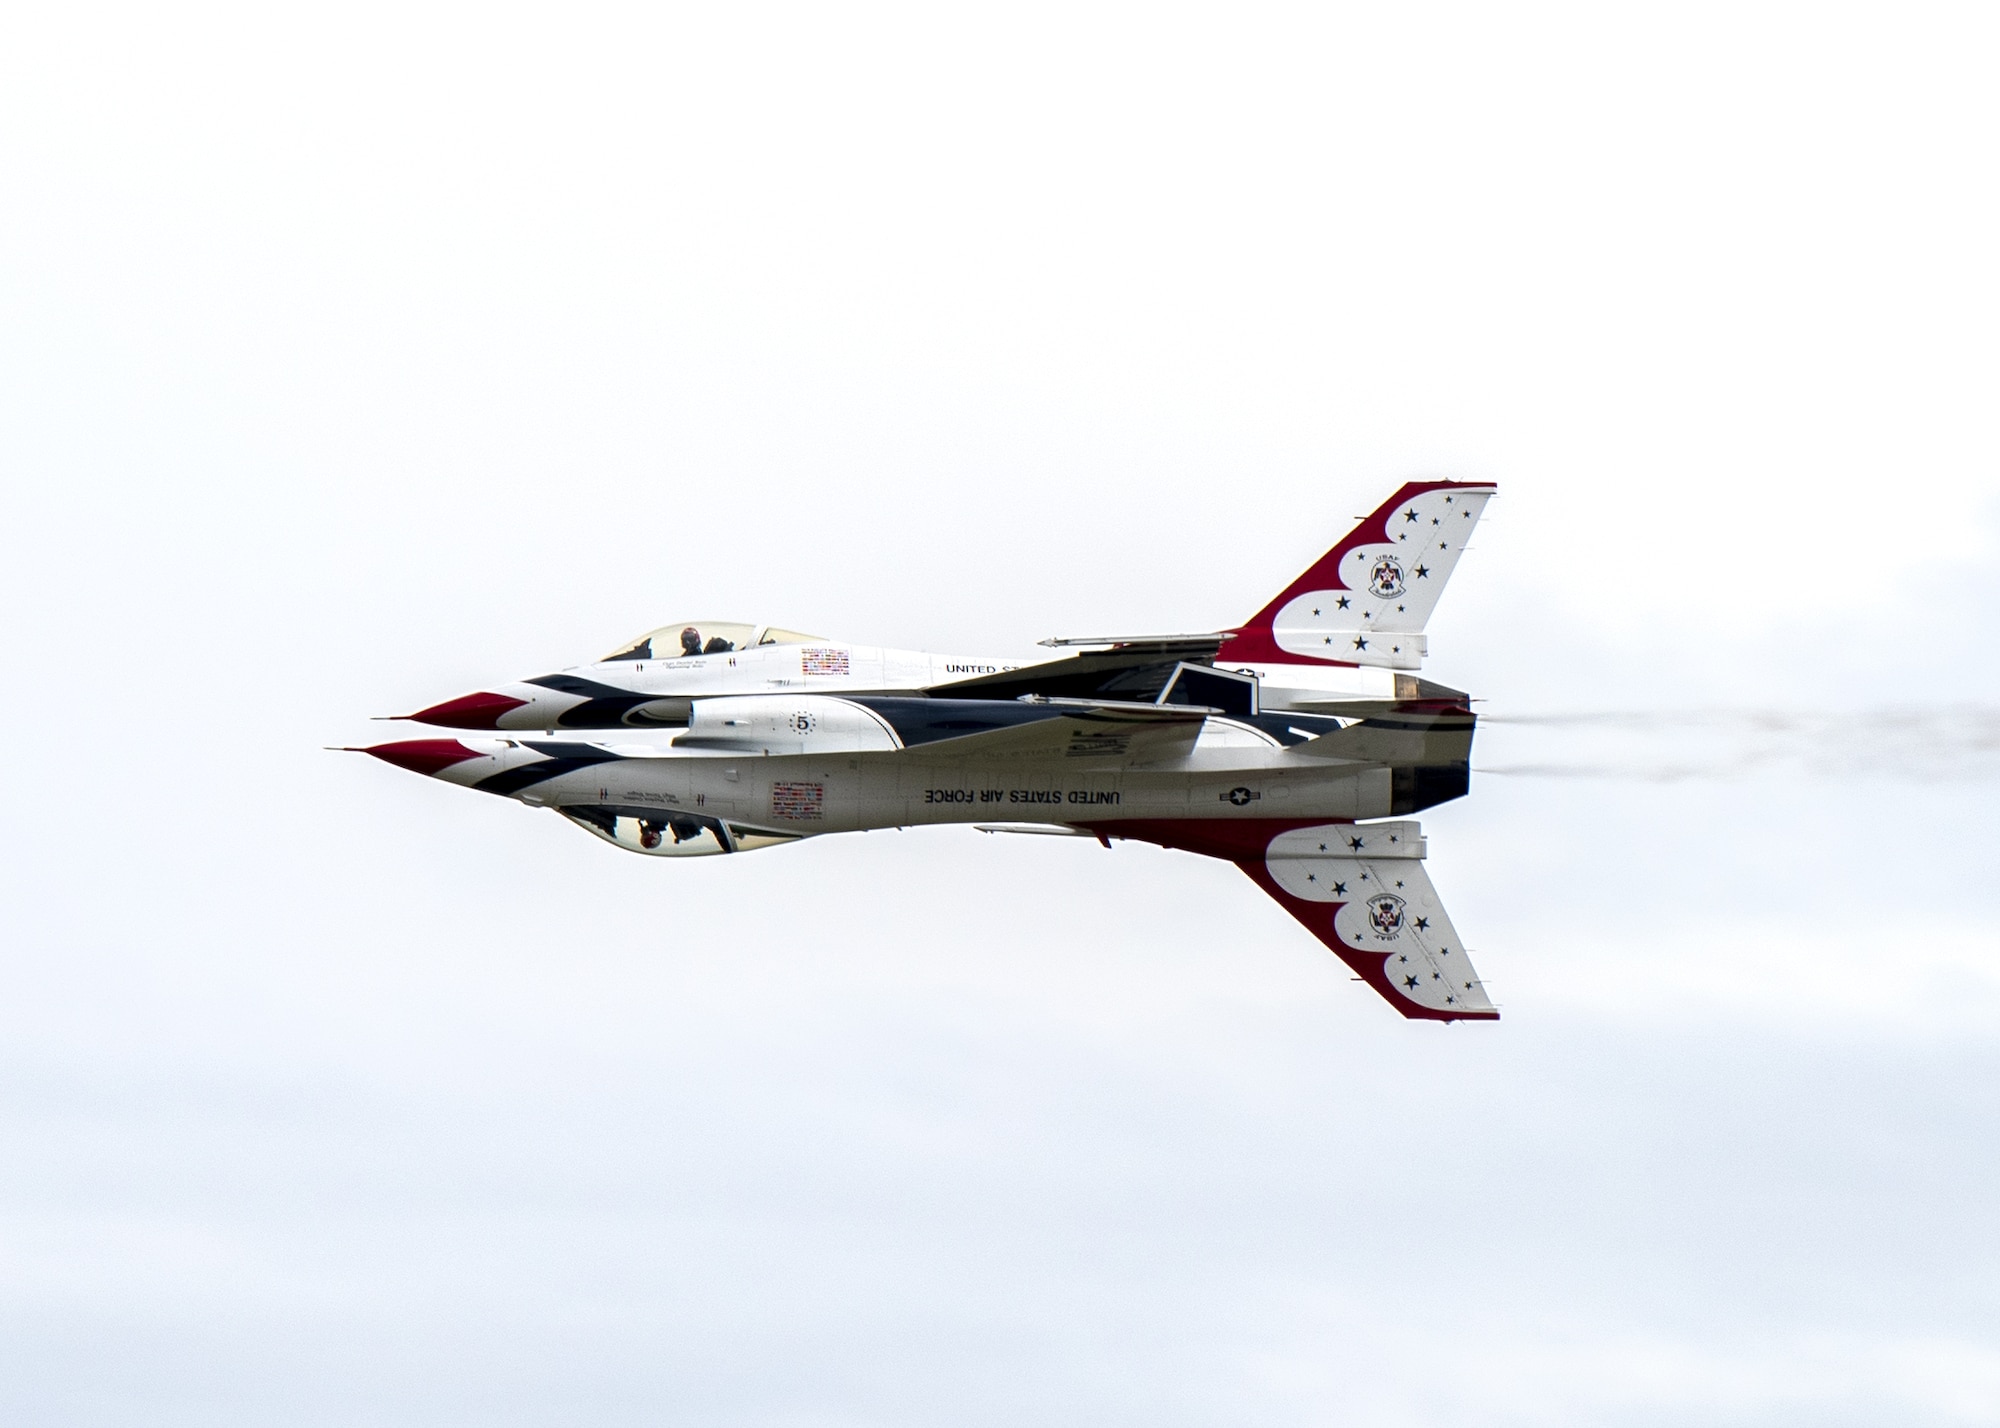 The U.S. Air Force Thunderbirds perform during the Fairchild Skyfest 2022 airshow at Fairchild Air Force Base, Washington, May 15, 2022. Fairchild Skyfest 2022 included the U.S. Air Force Thunderbirds, one of the Air Force’s premier demonstration teams showcasing the capabilities of the F-16 Fighting Falcon. (U.S. Air Force photo by Staff Sgt. Lawrence Sena)